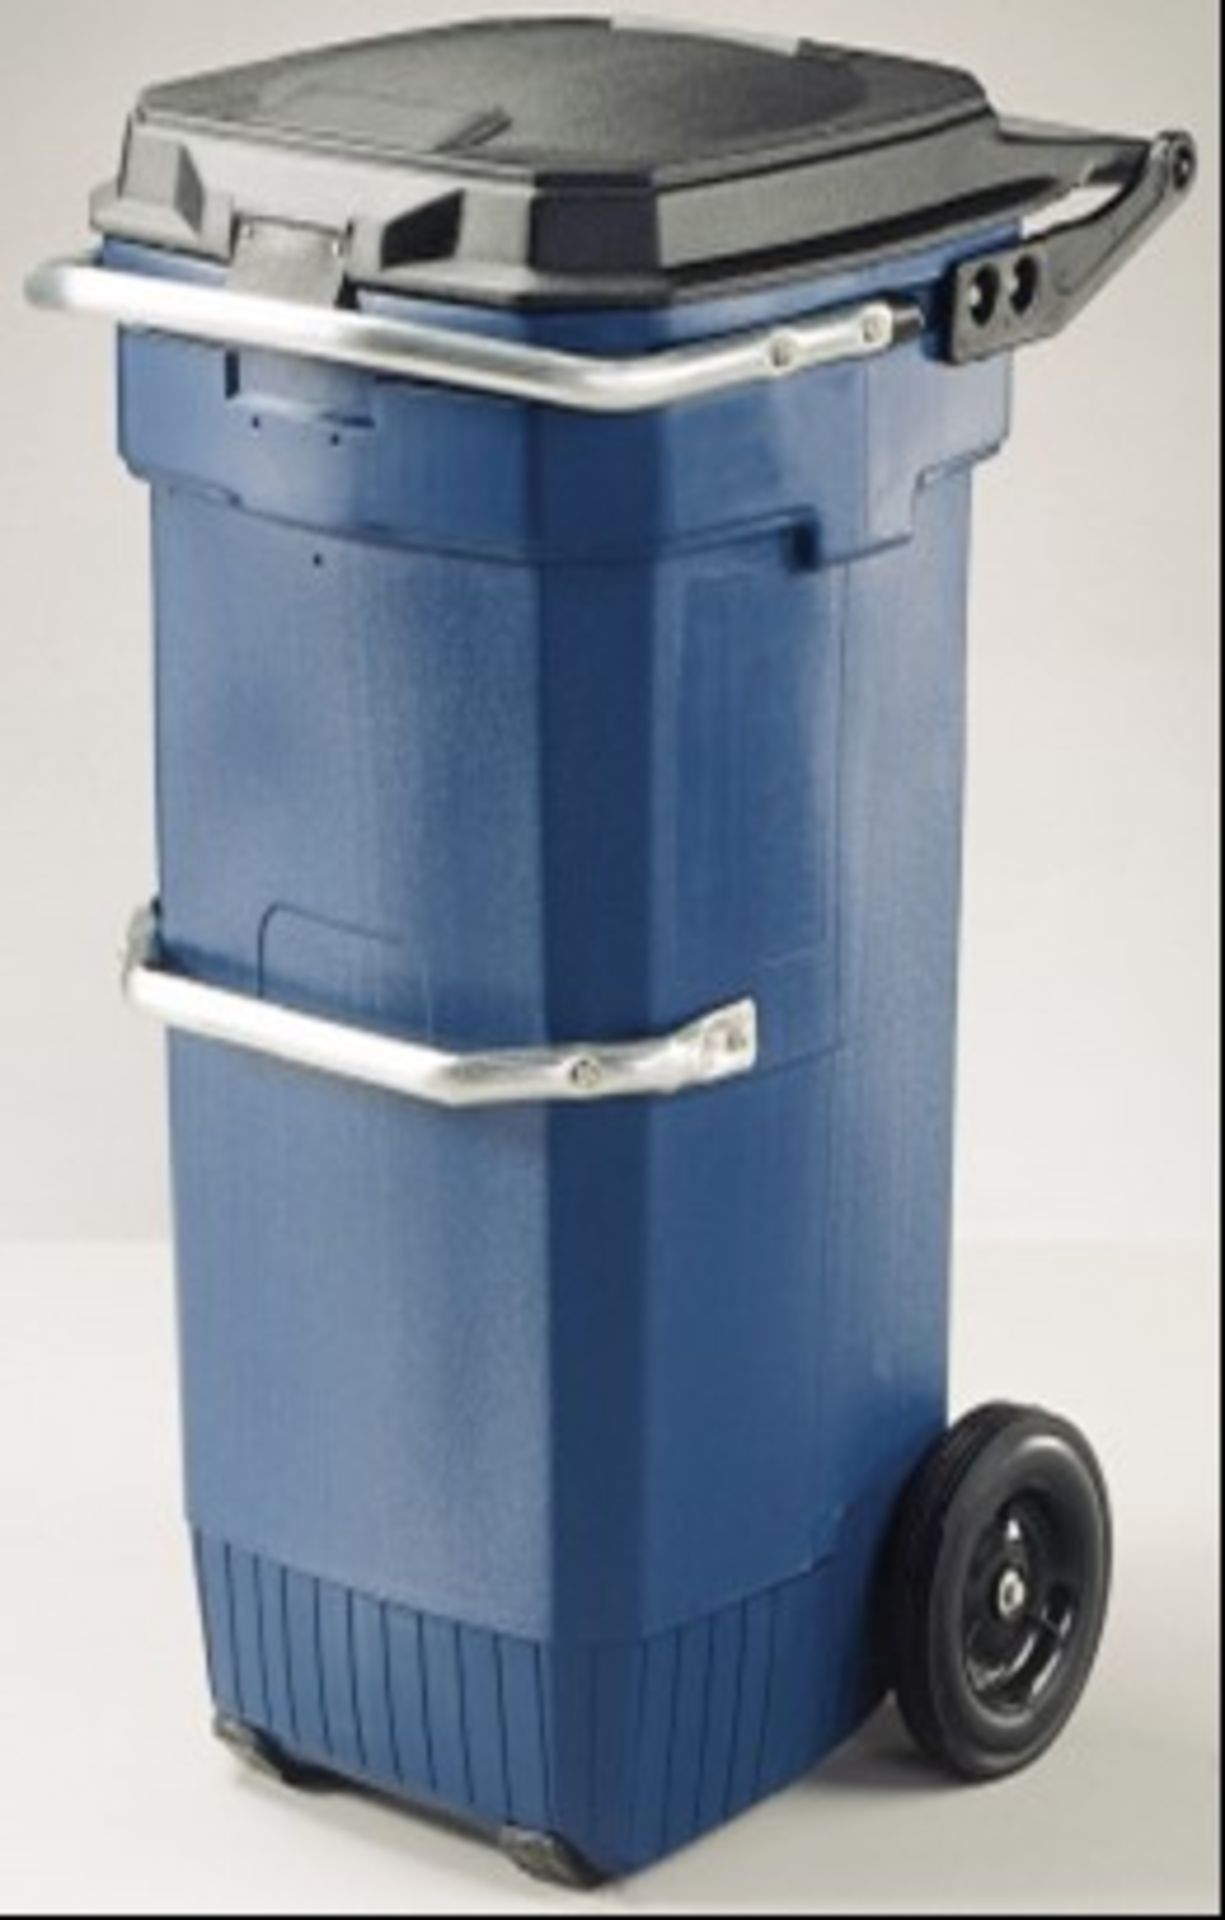 Universal Waste Cart Business - A blow molded, universal waste cart design has been developed to - Image 2 of 2